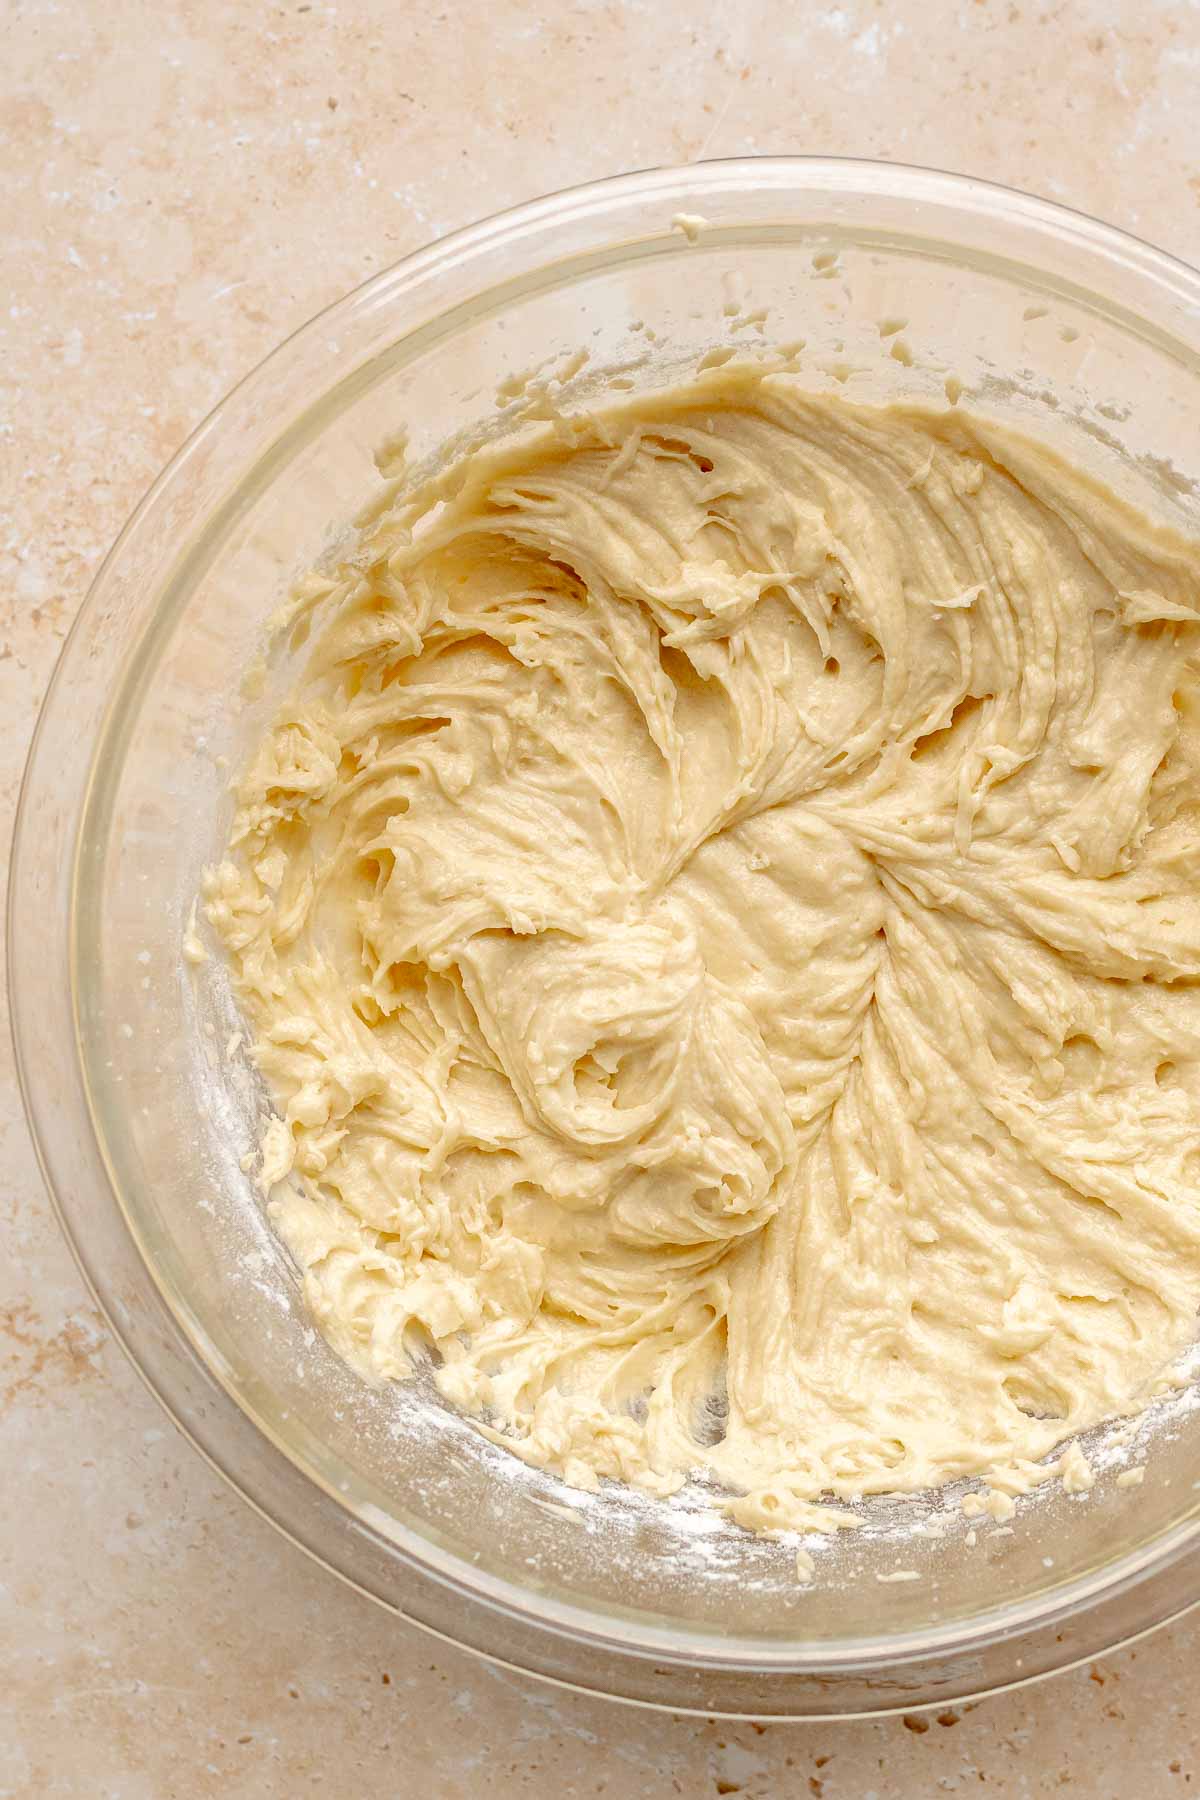 Whipped cake batter in a bowl.